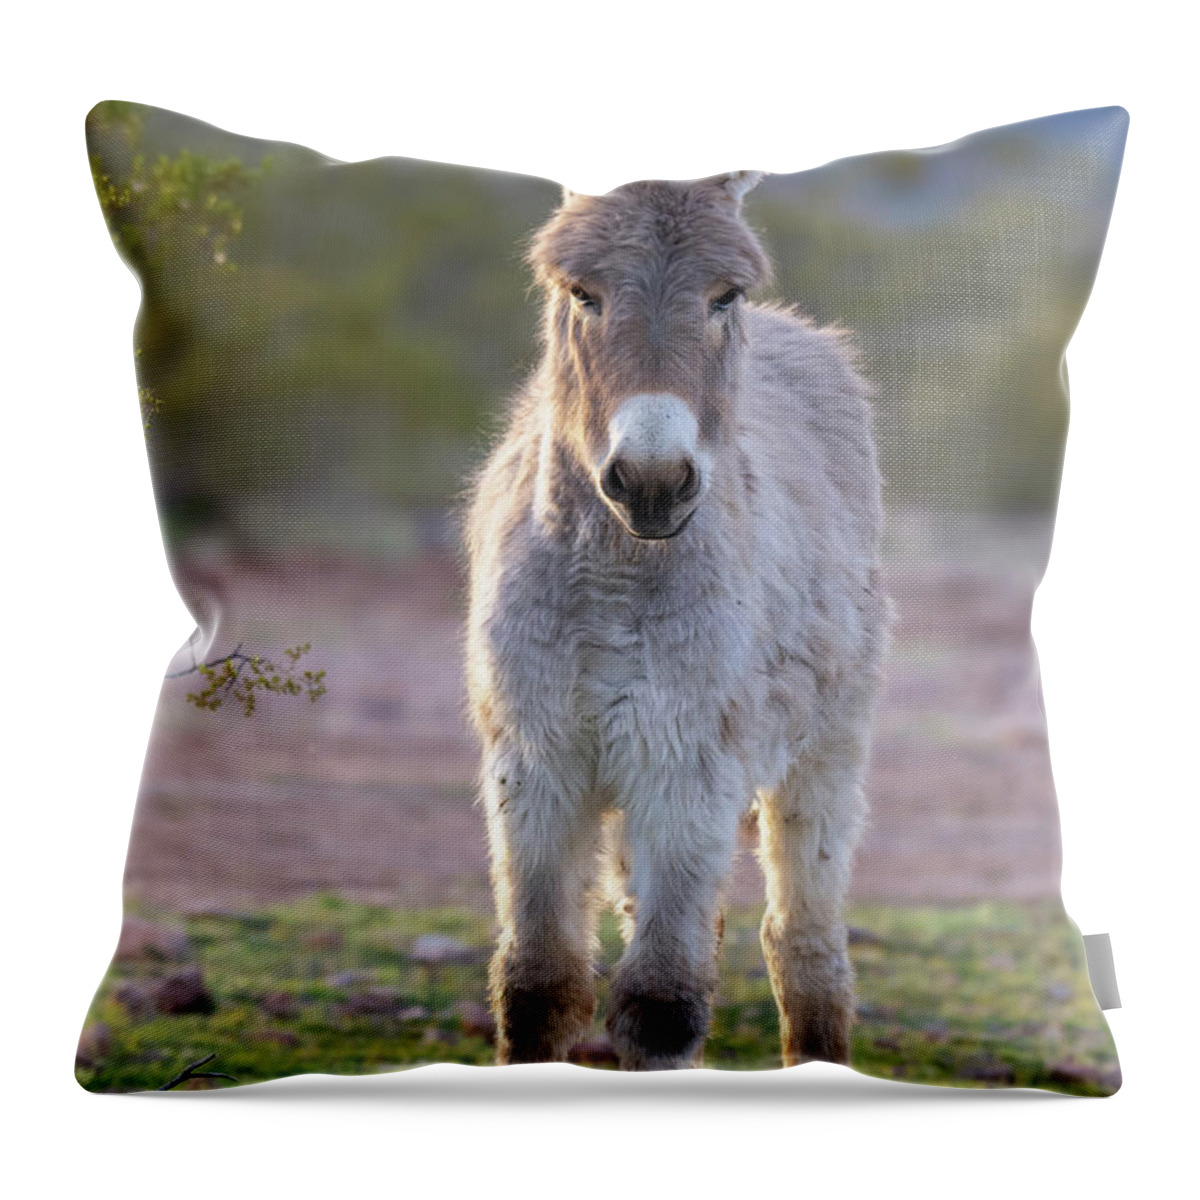 Wild Burro Throw Pillow featuring the photograph Evening Friend by Mary Hone